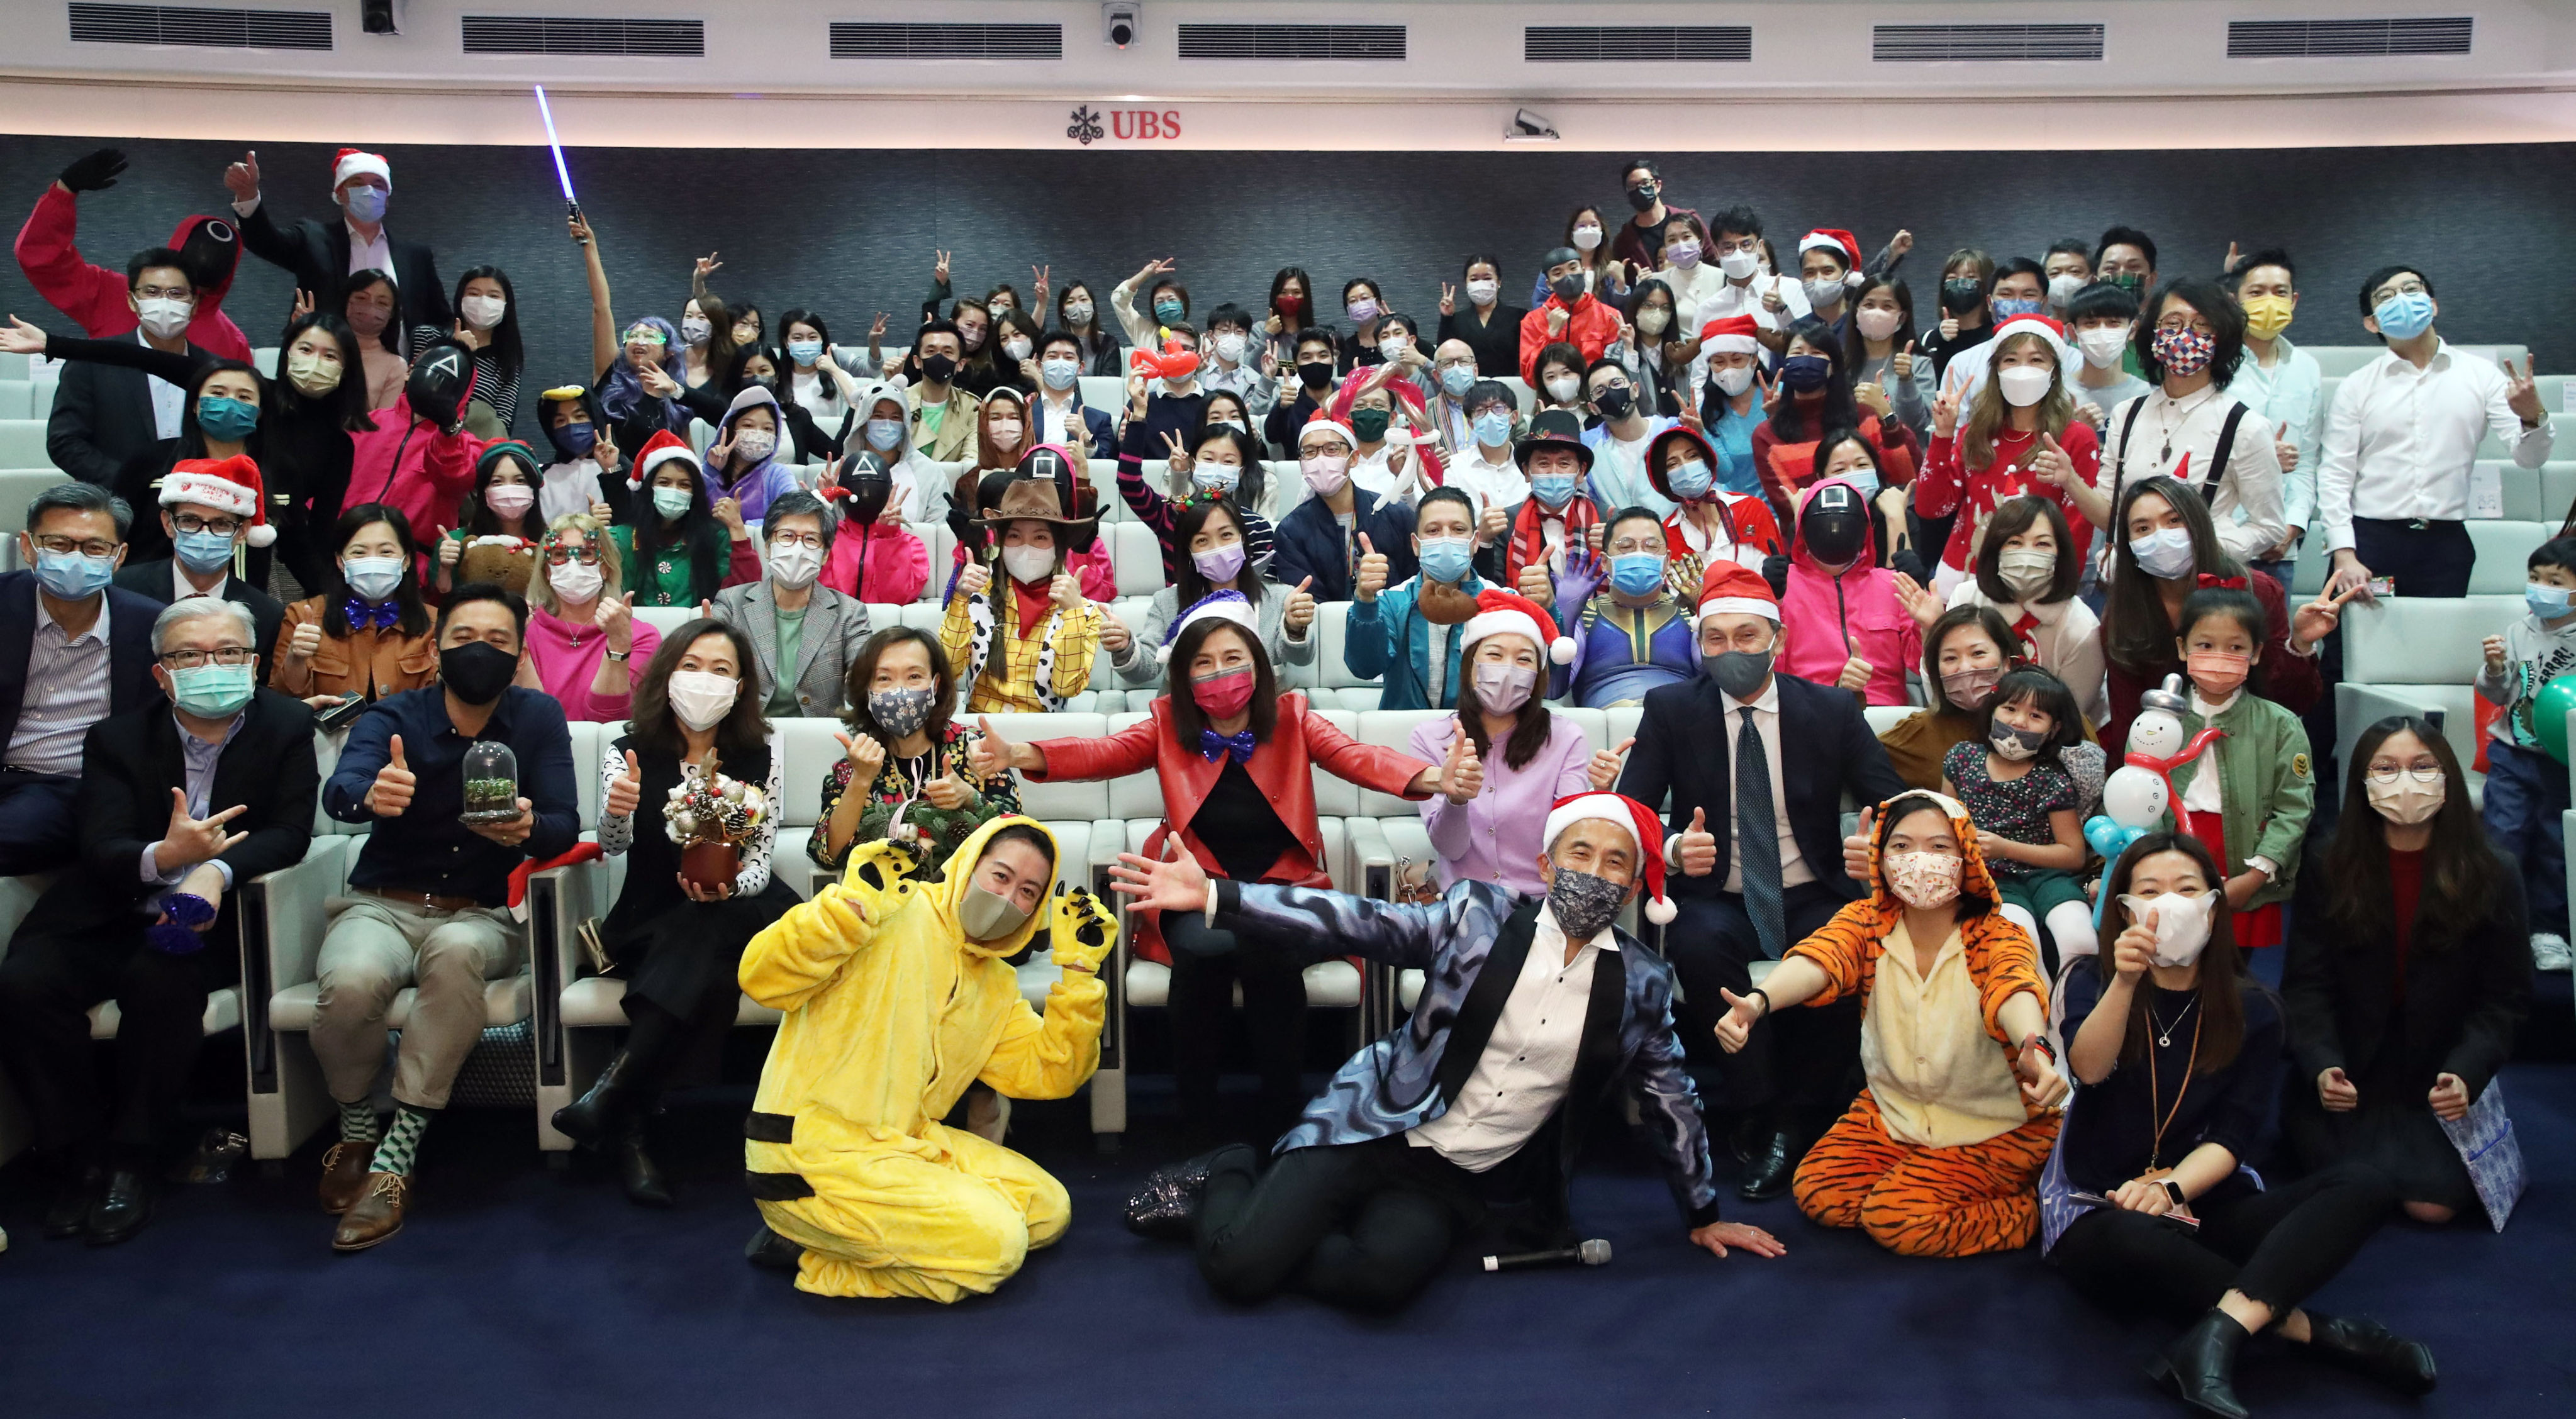 UBS staff raised some HK$1.6 million for Operation Santa Claus at their annual Christmas Party. Photo: Edmond So